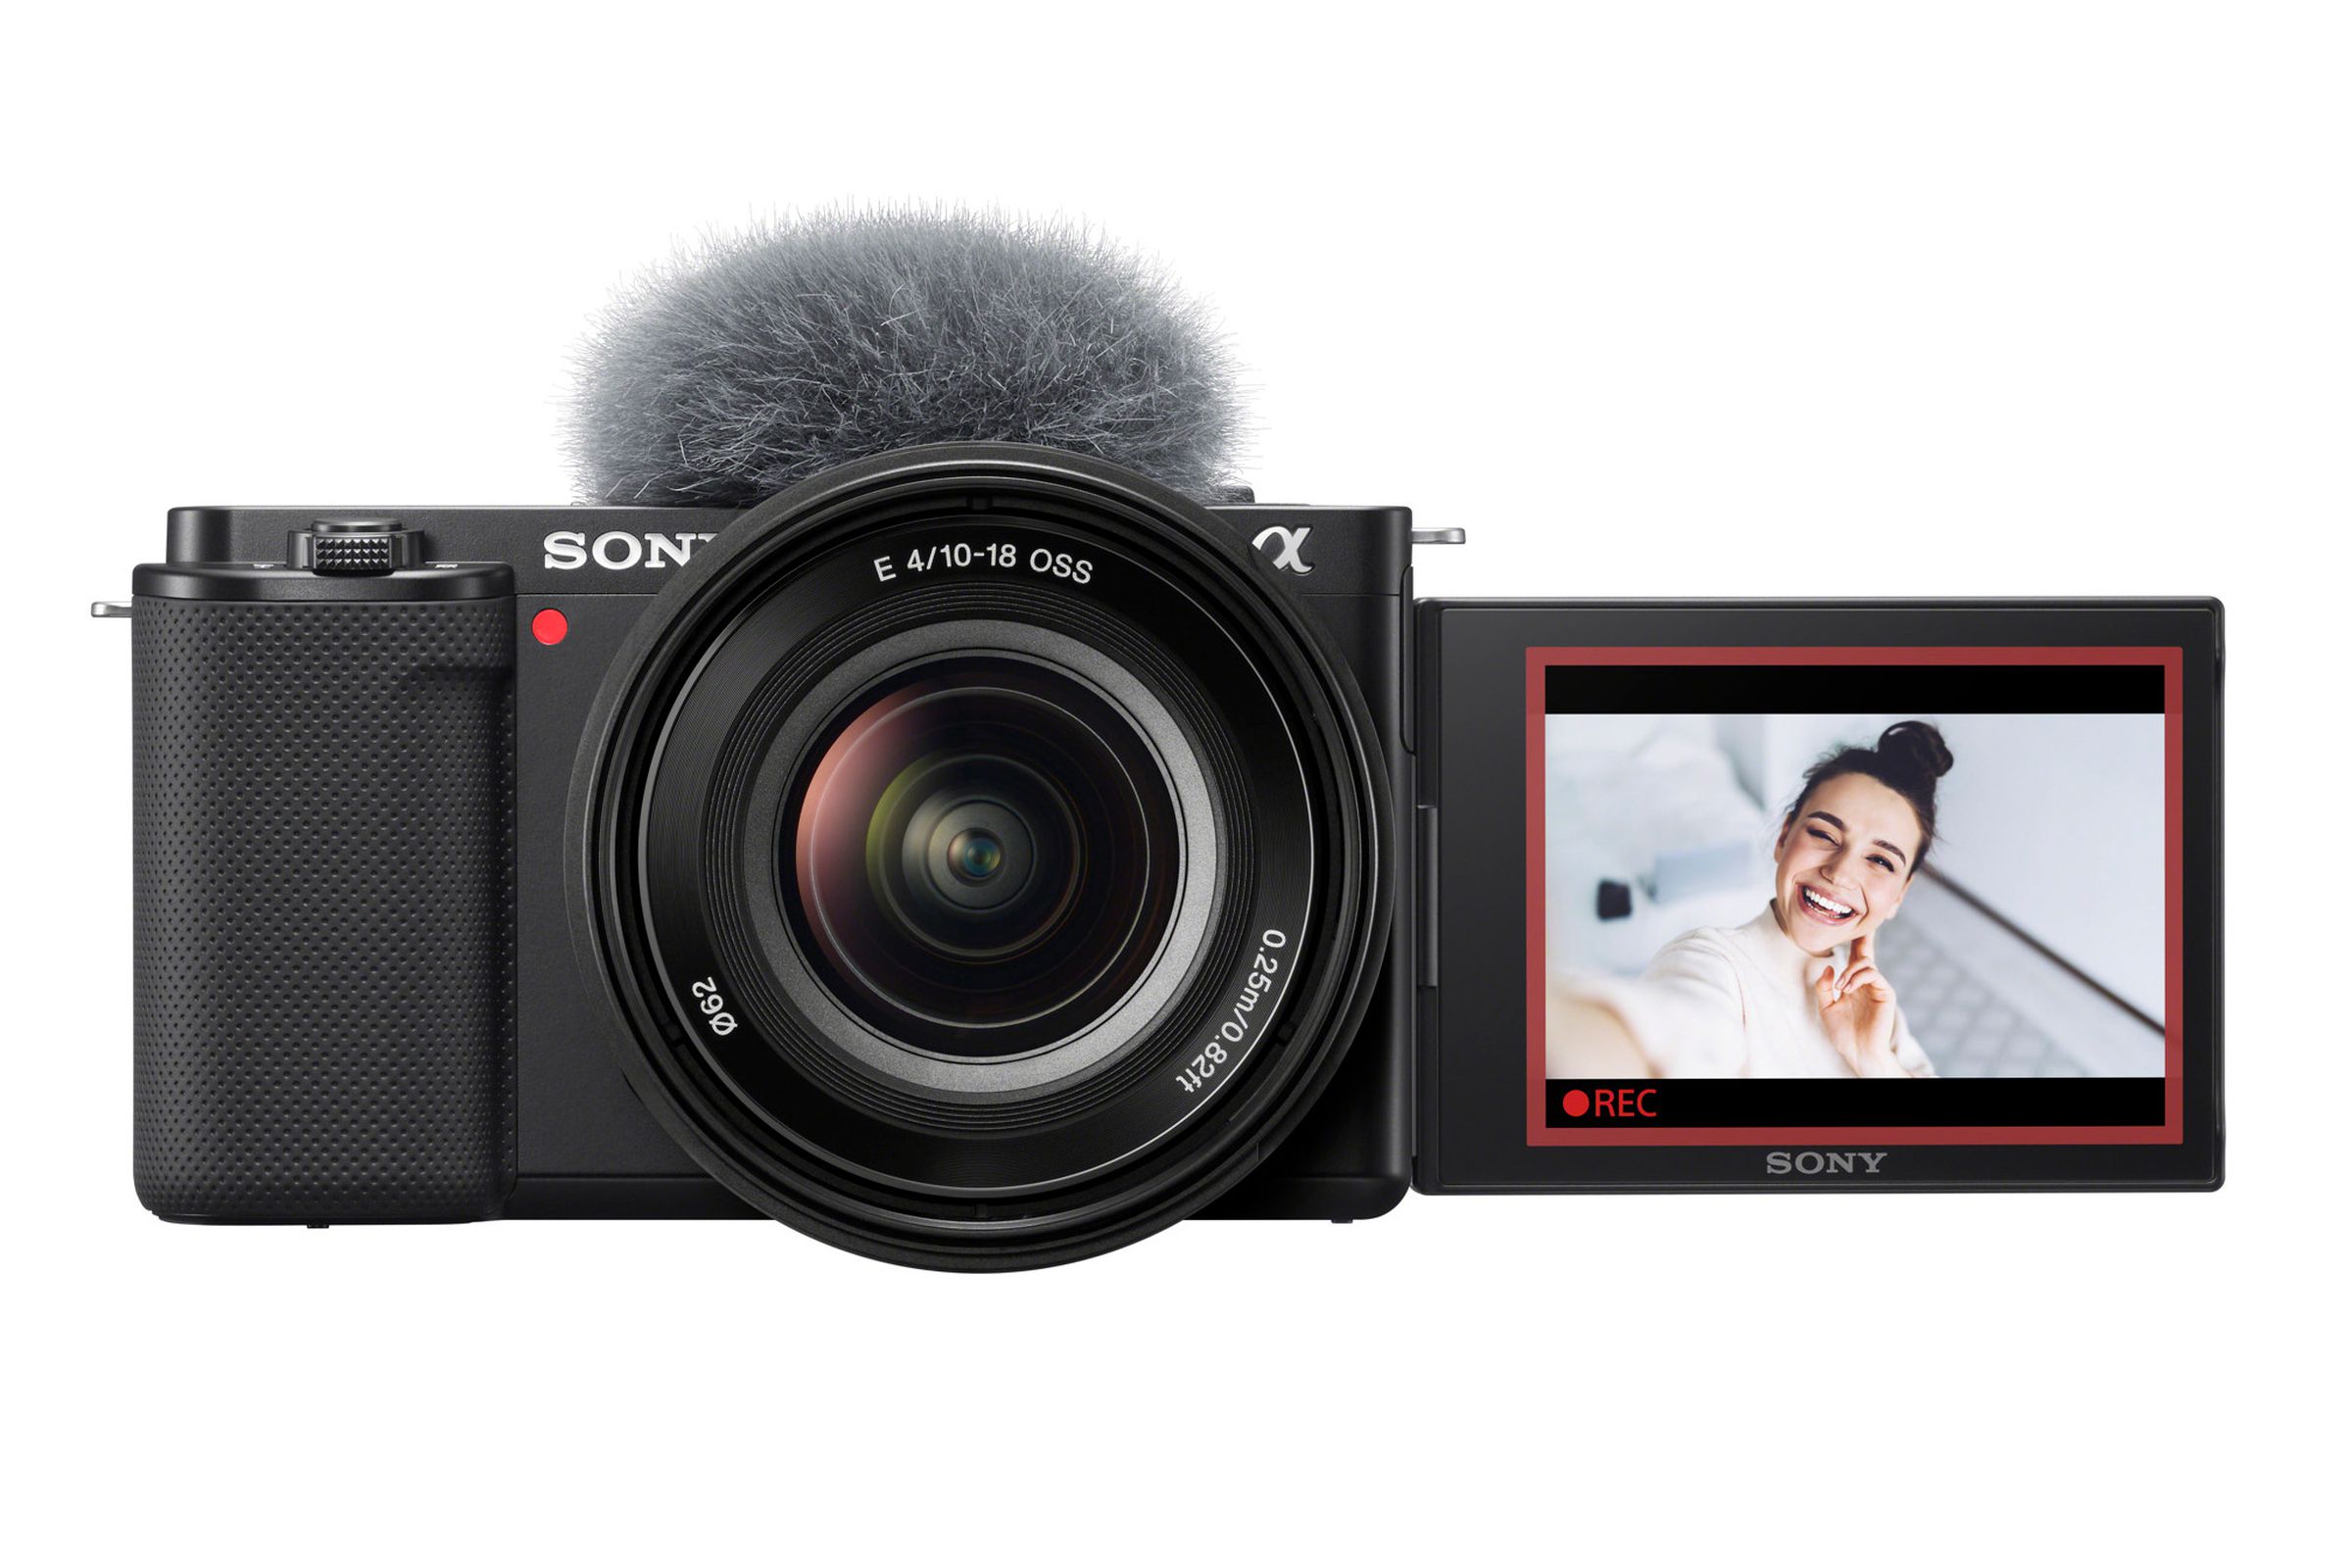 The ZV-E10 features an E-mount for interchangeable lenses and a large, 24-megapixel sensor.